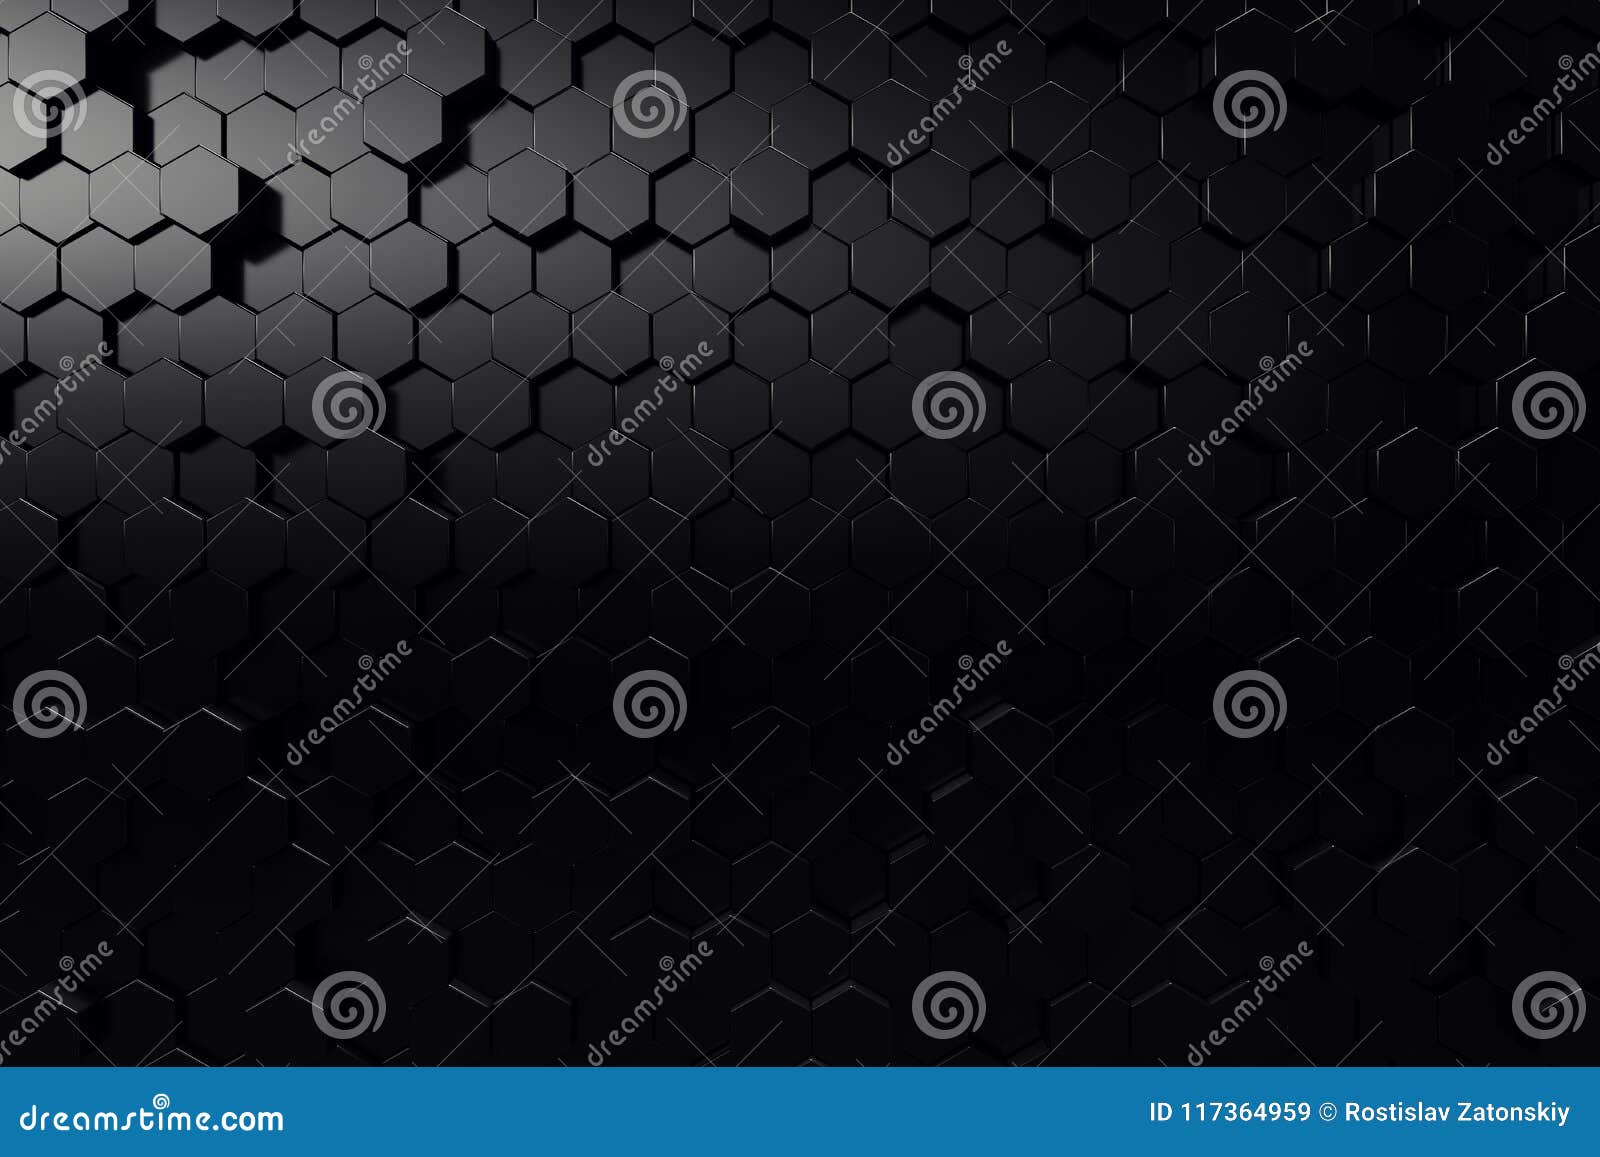 abstract geometric surface. hexagonal black background. 3d rendering